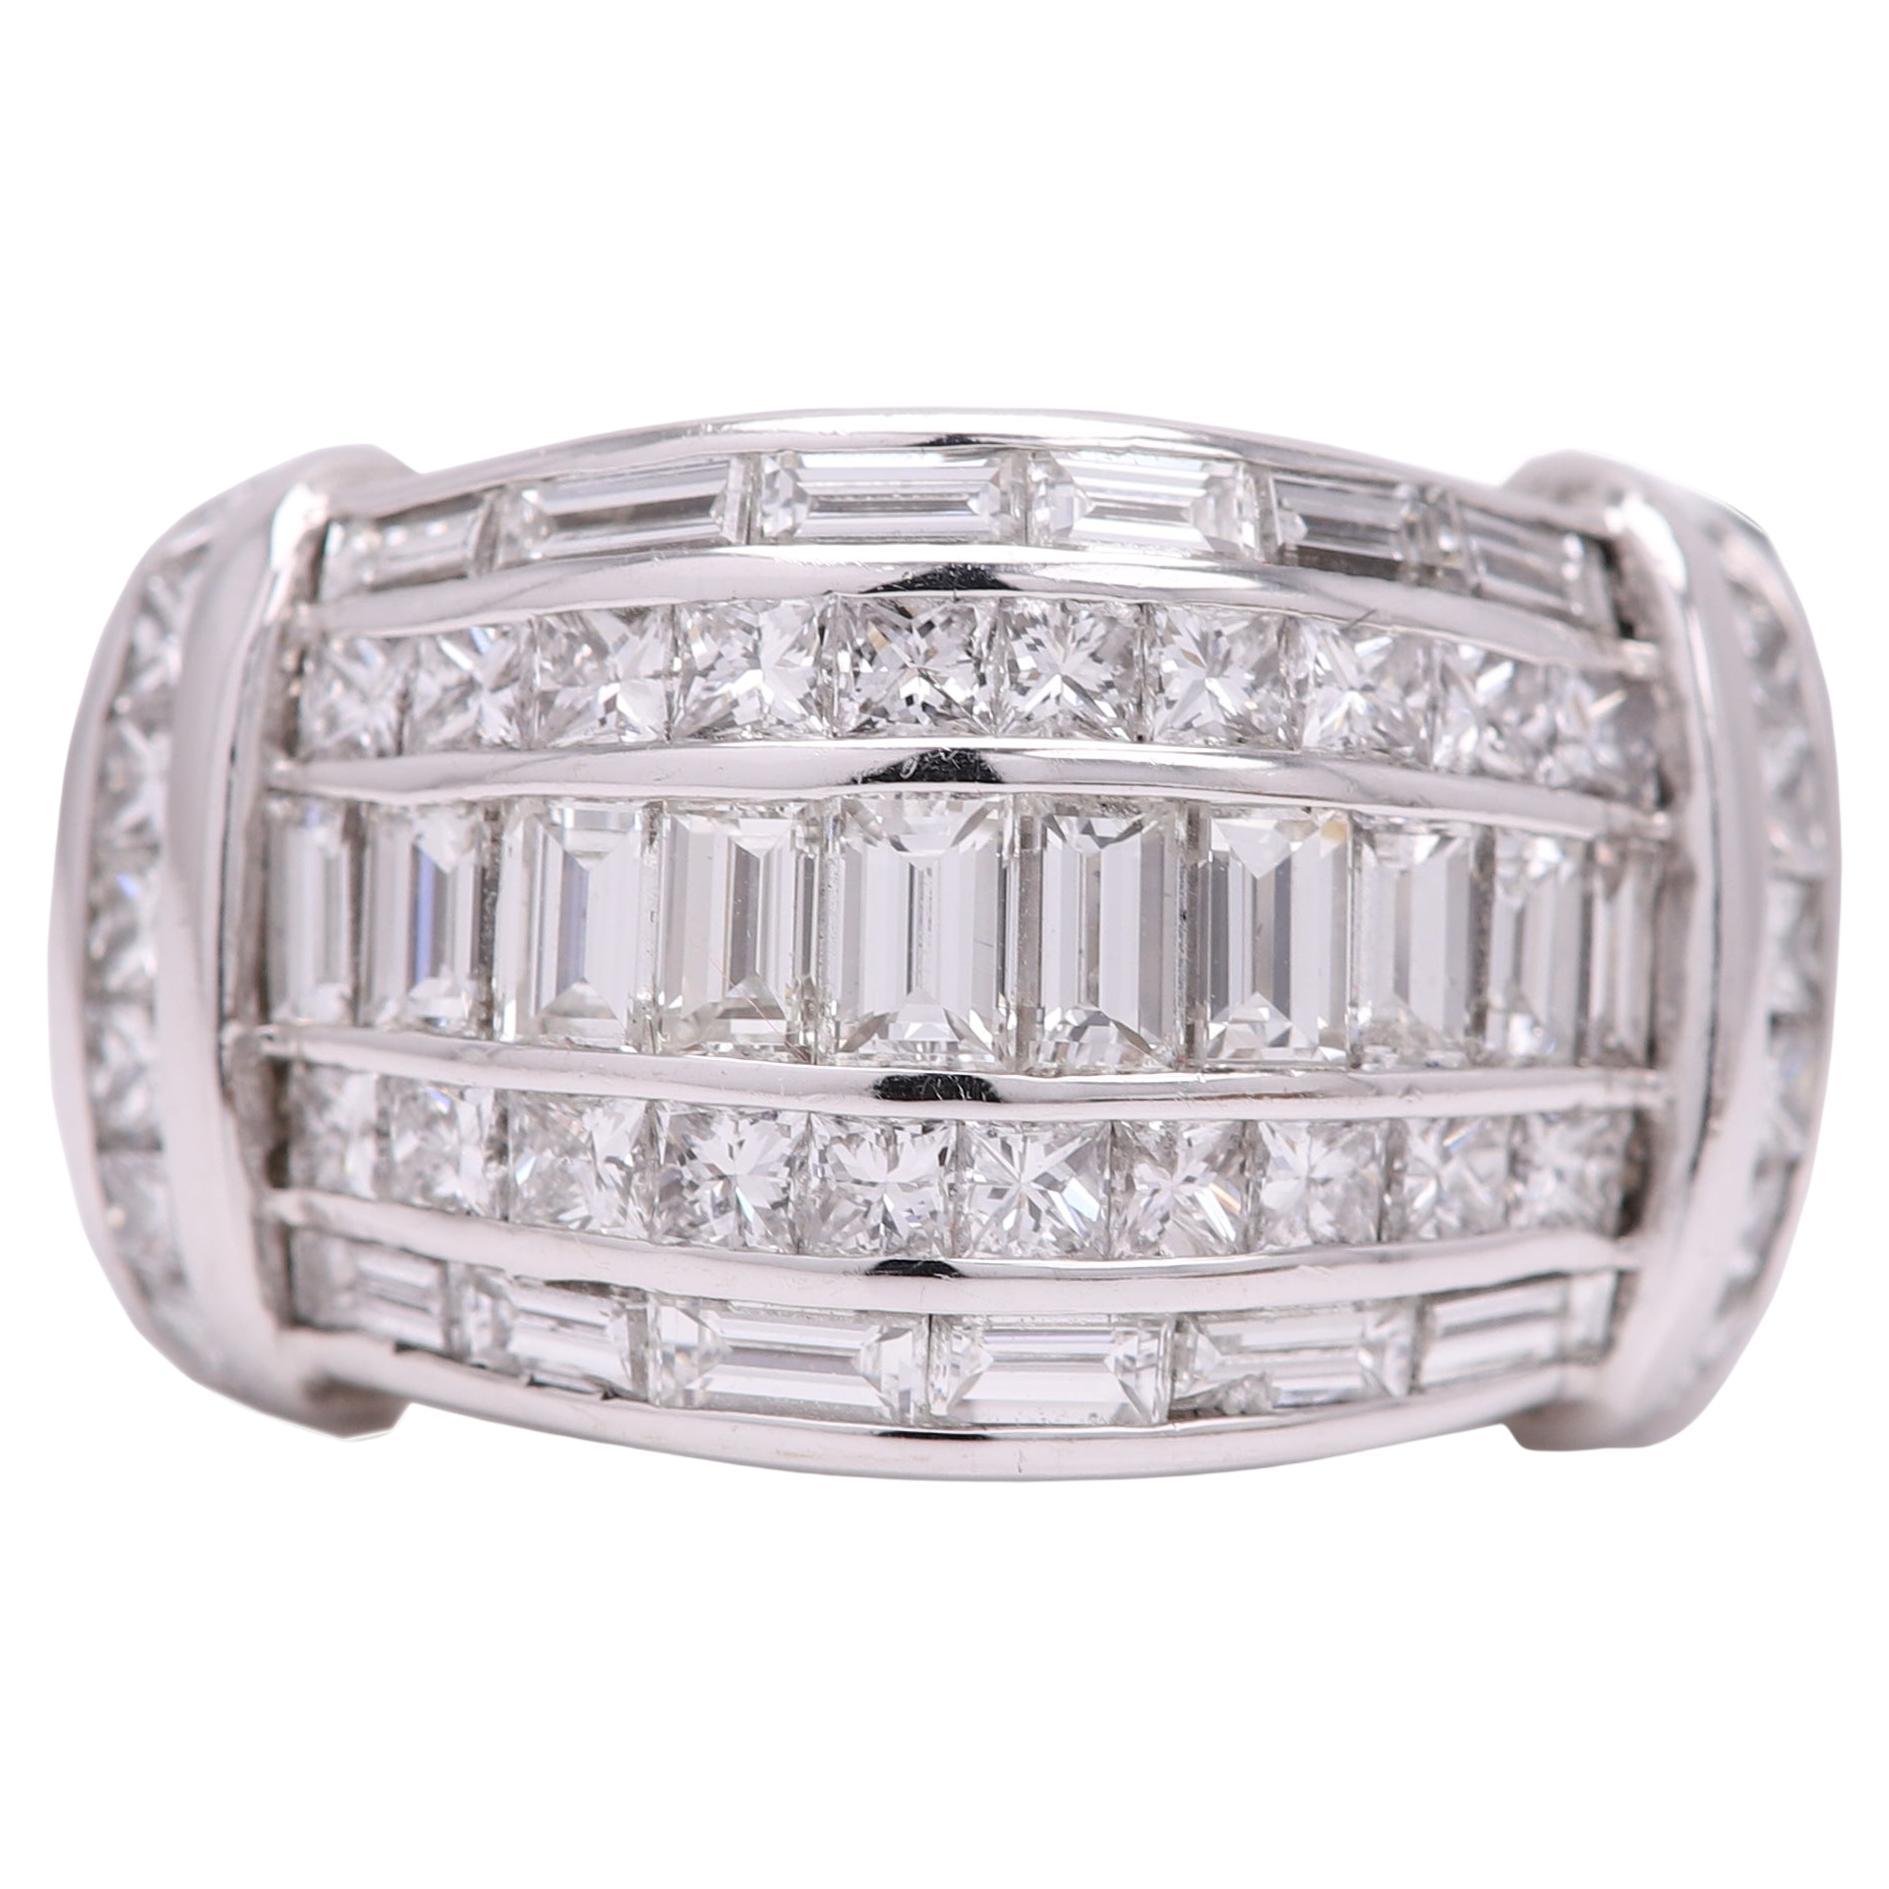 Cluster baguette ring
very impressive and statement
Total diamonds 3.37 carat  F-G -VVSI - VVS2
14k white gold 14.2 grams
finger size 6.75
the ring design dimension is about 14 mm at the widest and down to about 10 mm at the narrower area
it has mix